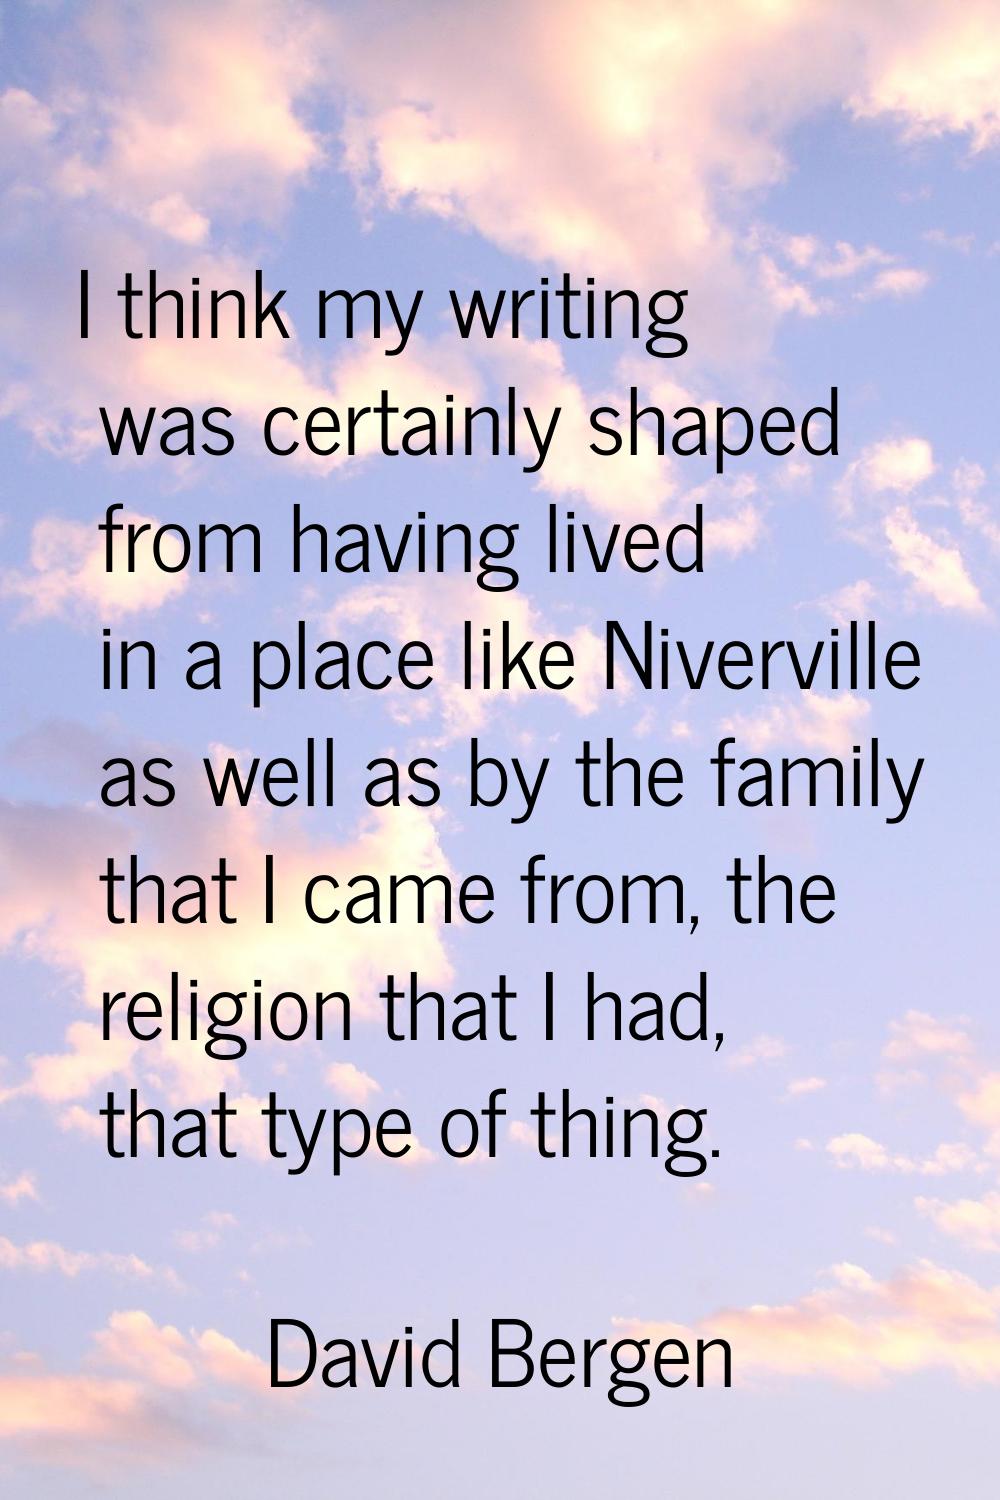 I think my writing was certainly shaped from having lived in a place like Niverville as well as by 